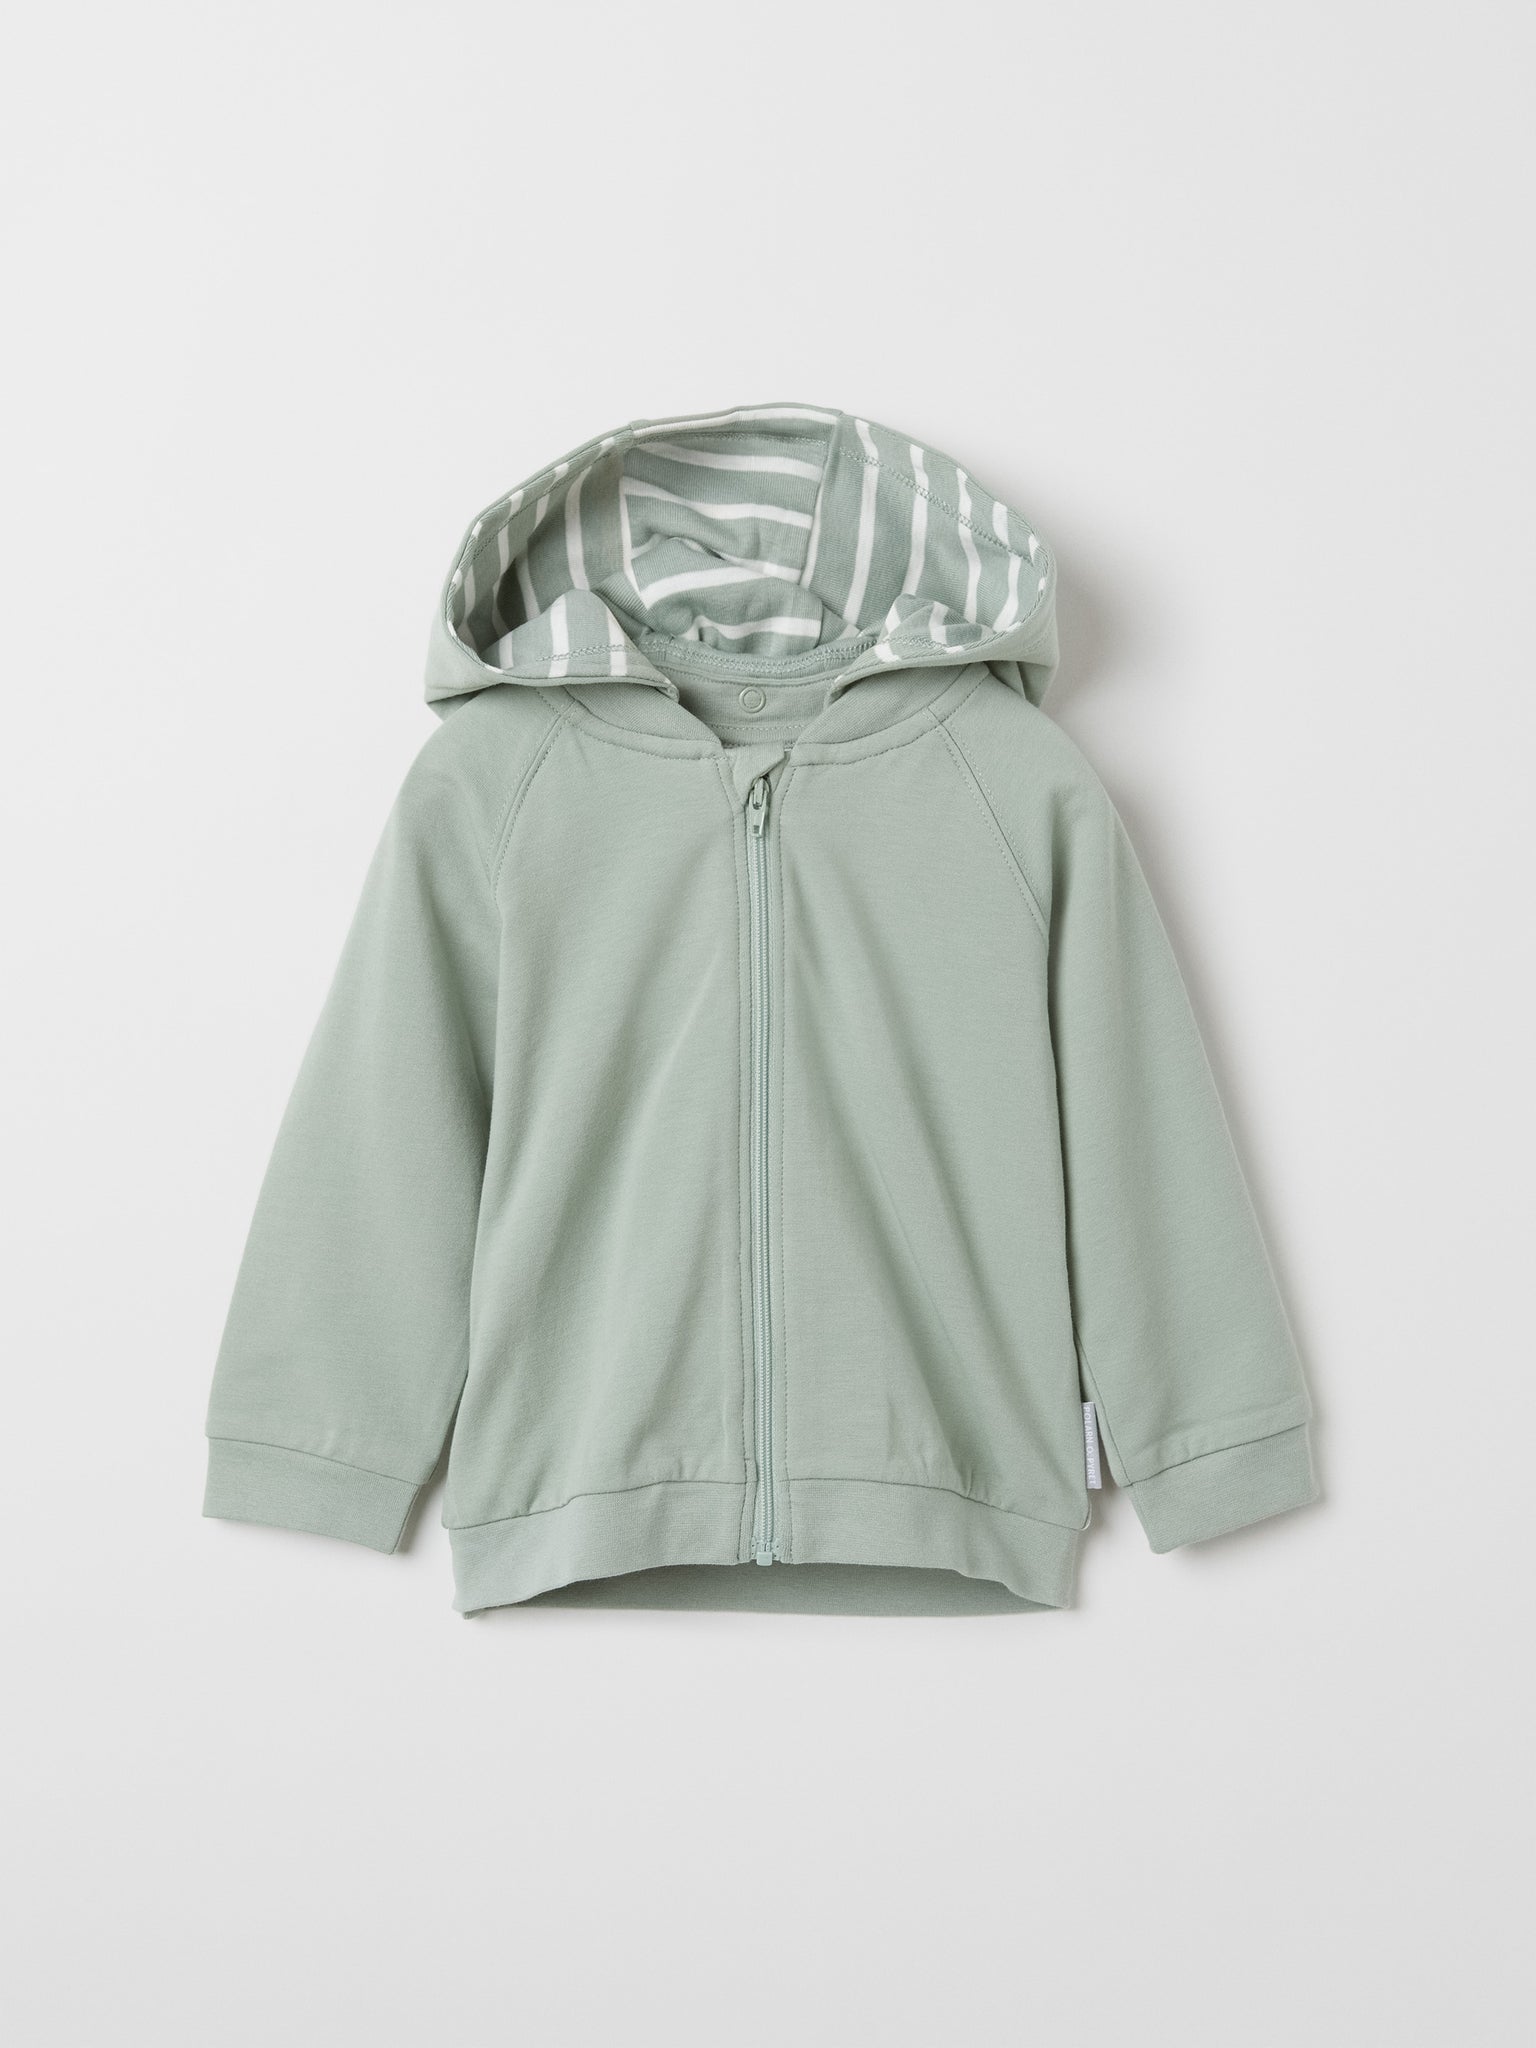 Organic Cotton Green Baby Hoodie from the Polarn O. Pyret baby collection. Ethically produced baby clothing.